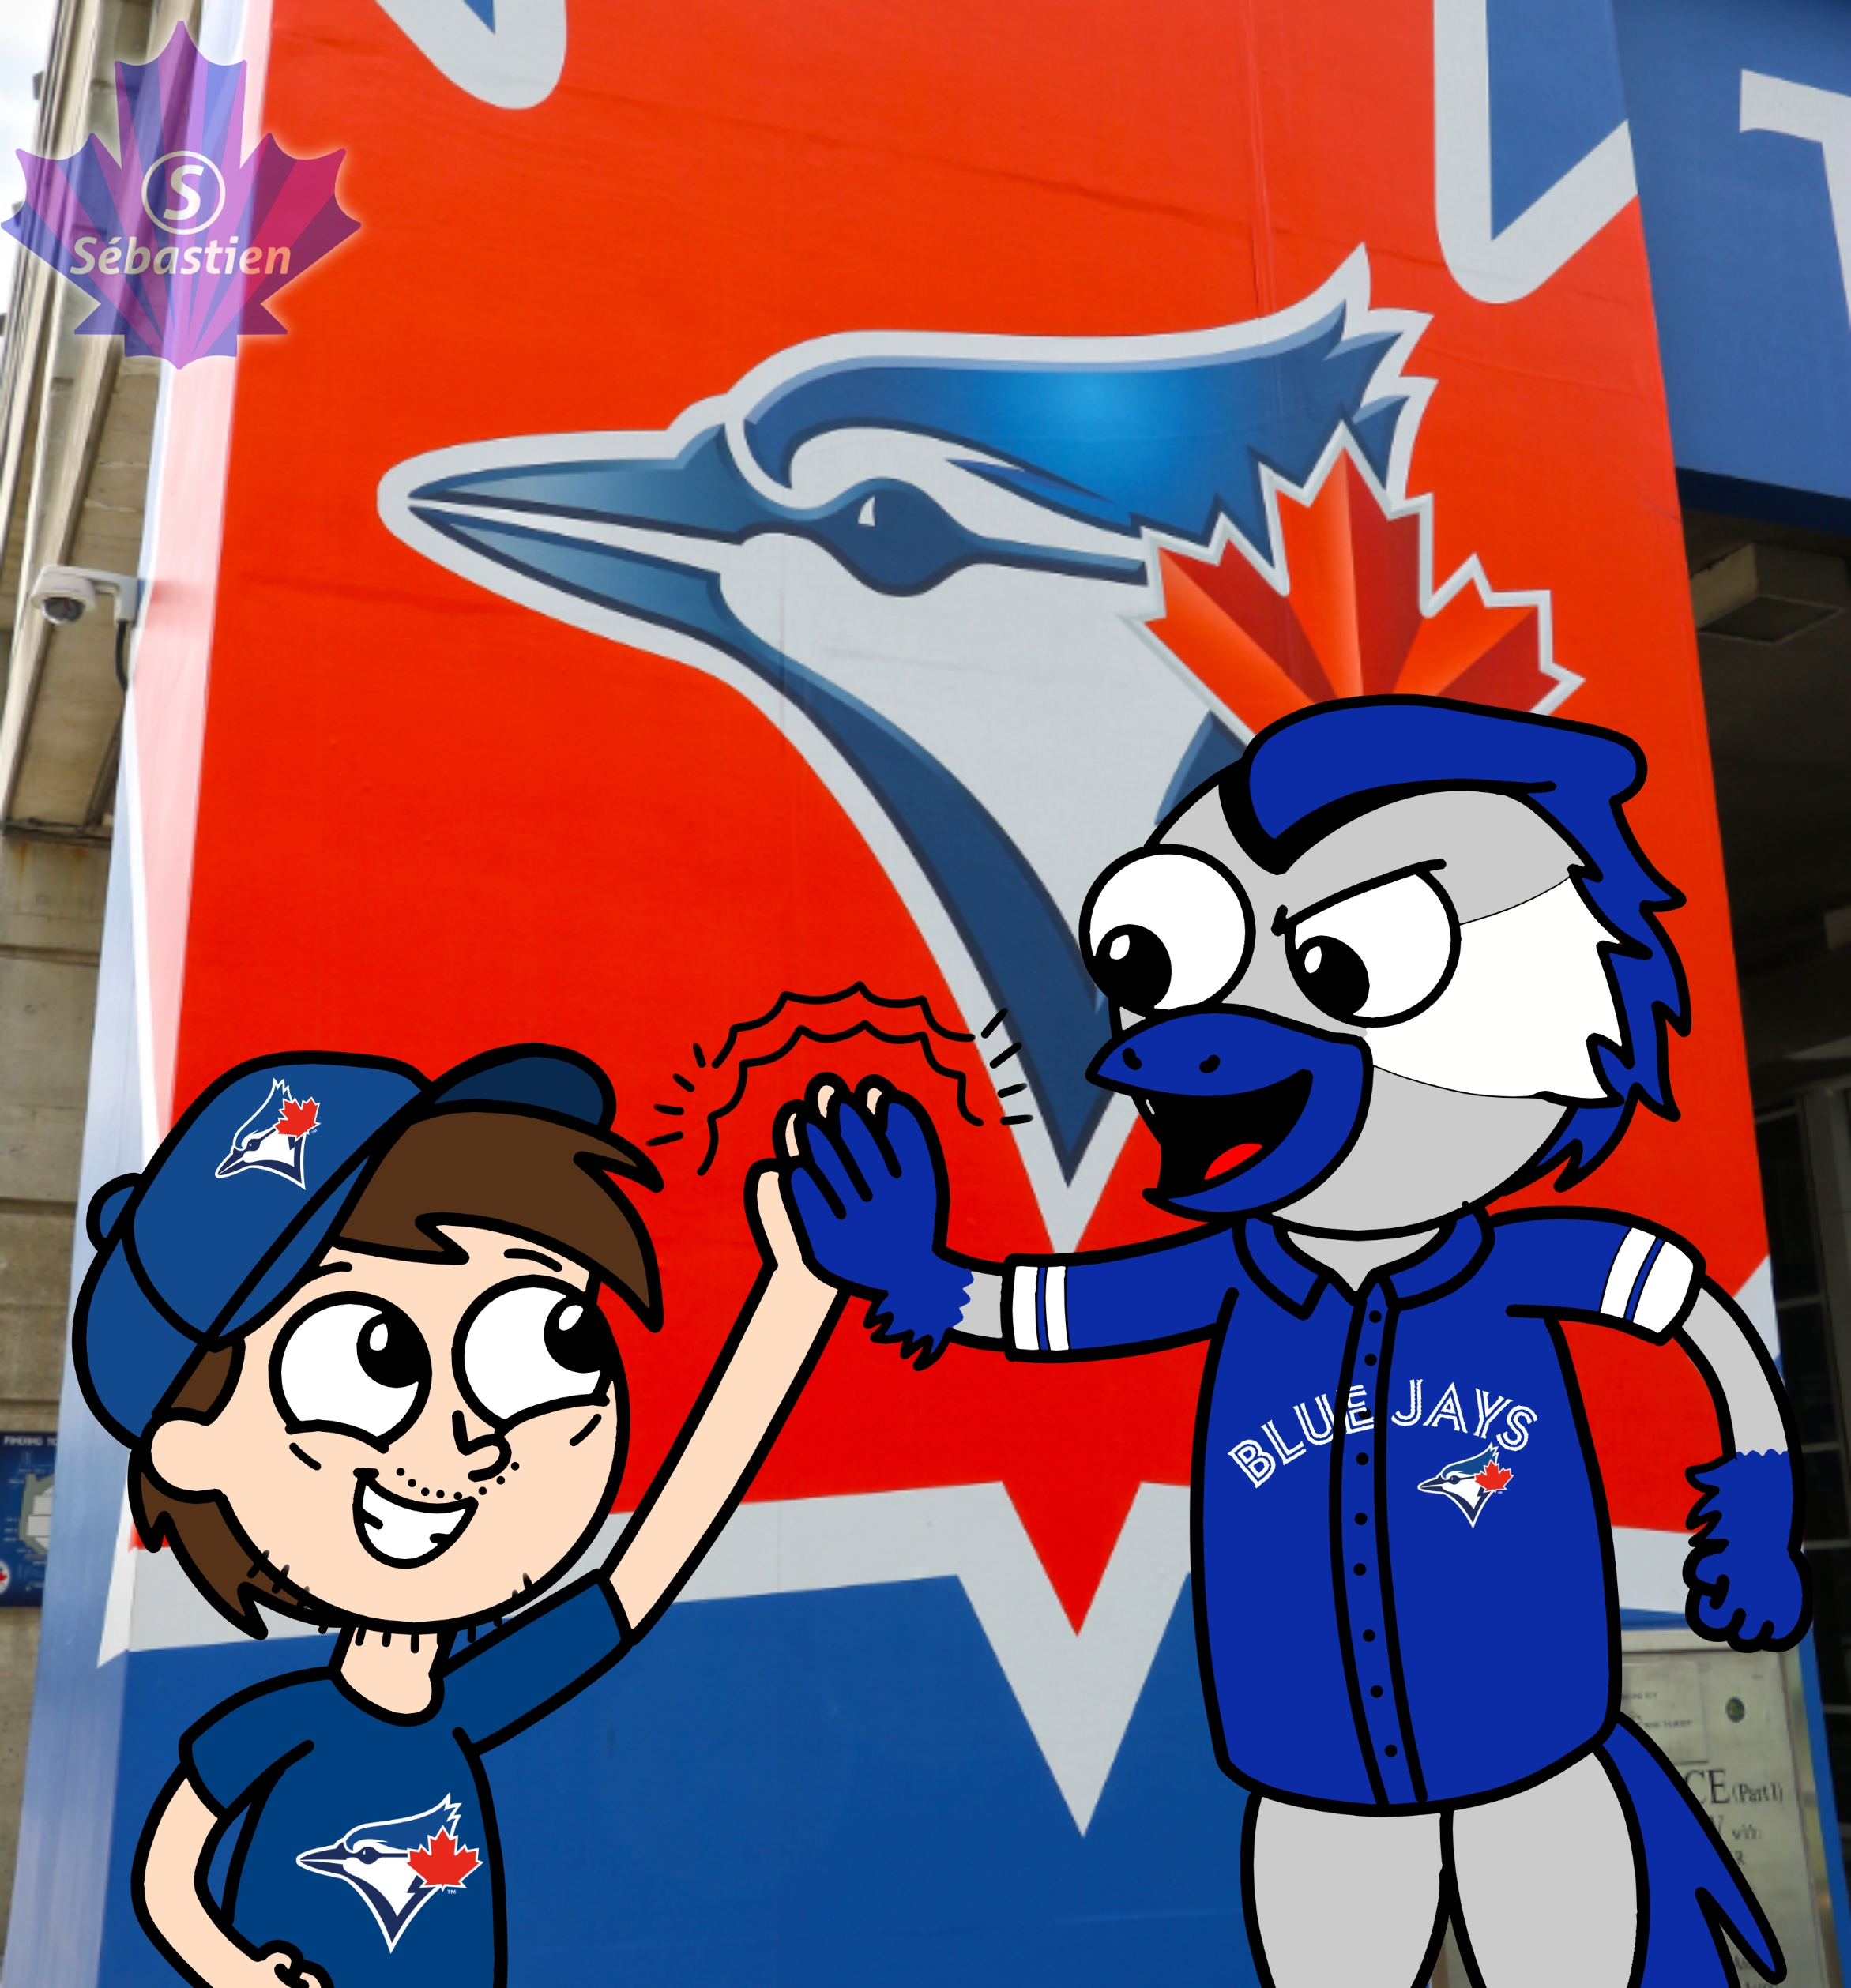 Giving a high five to Ace, the Toronto Blue Jays mascot by Seb